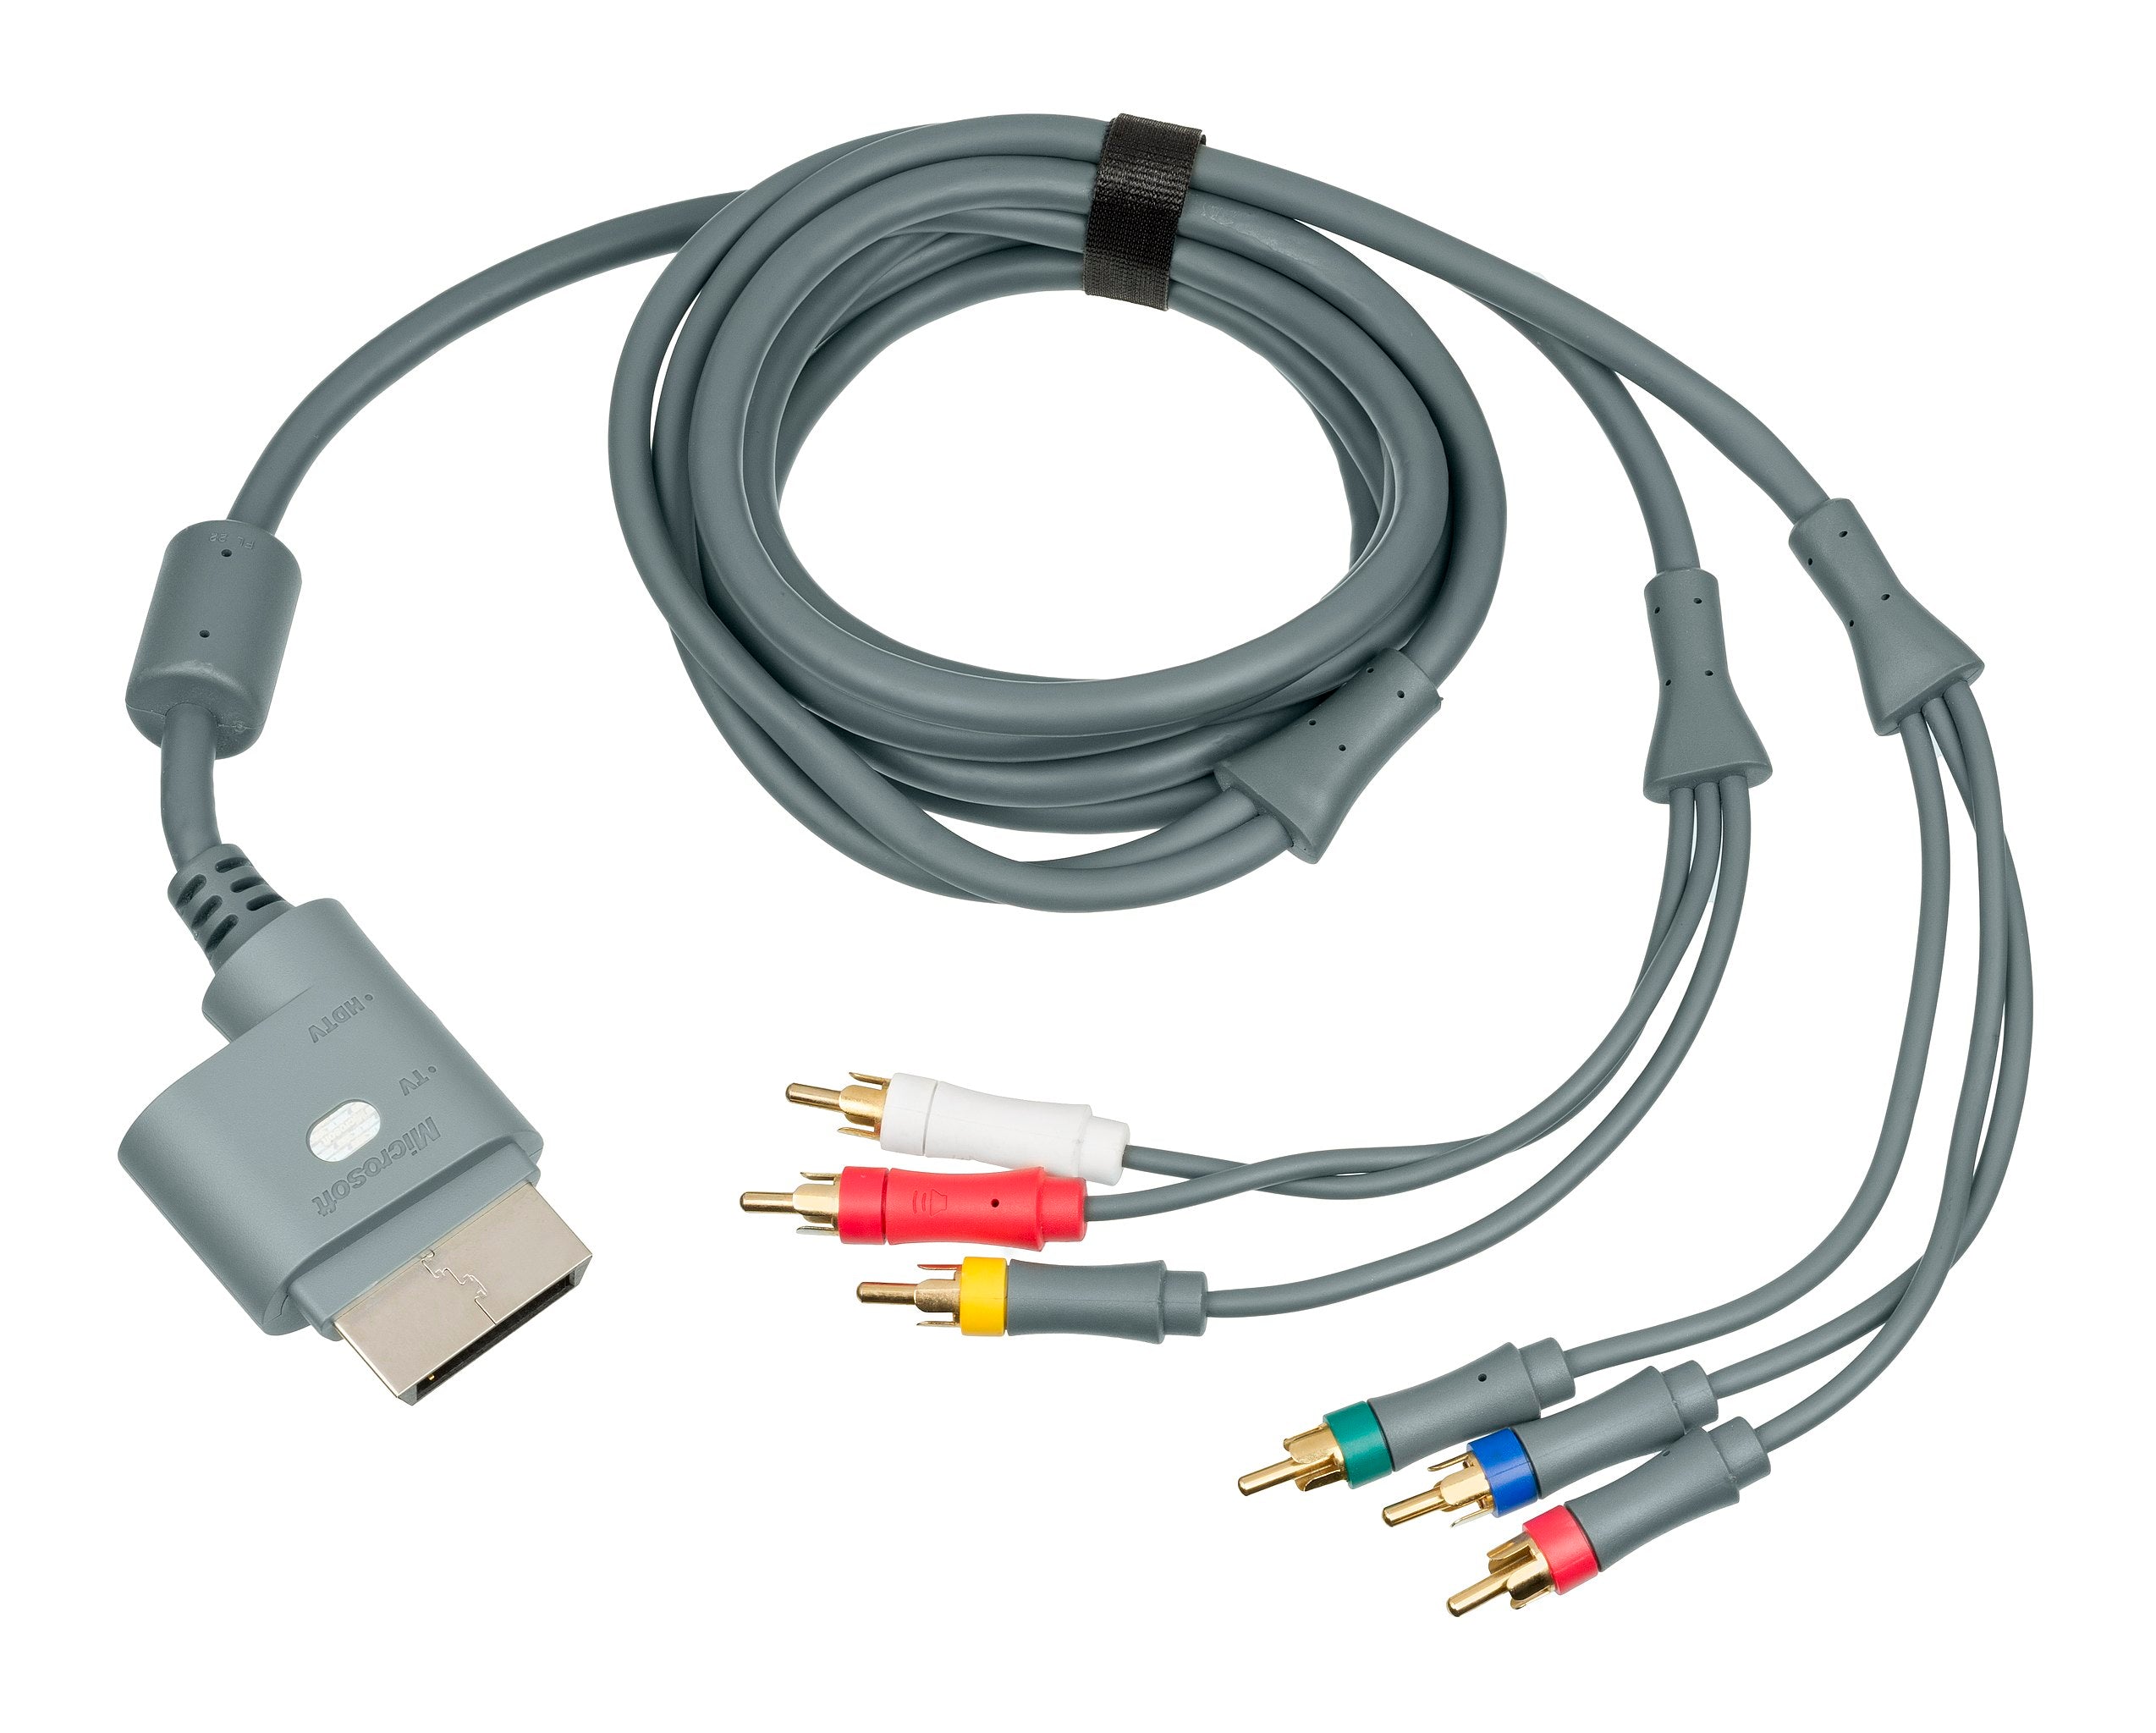 Cable | XBOX 360 | Component HD AV cable